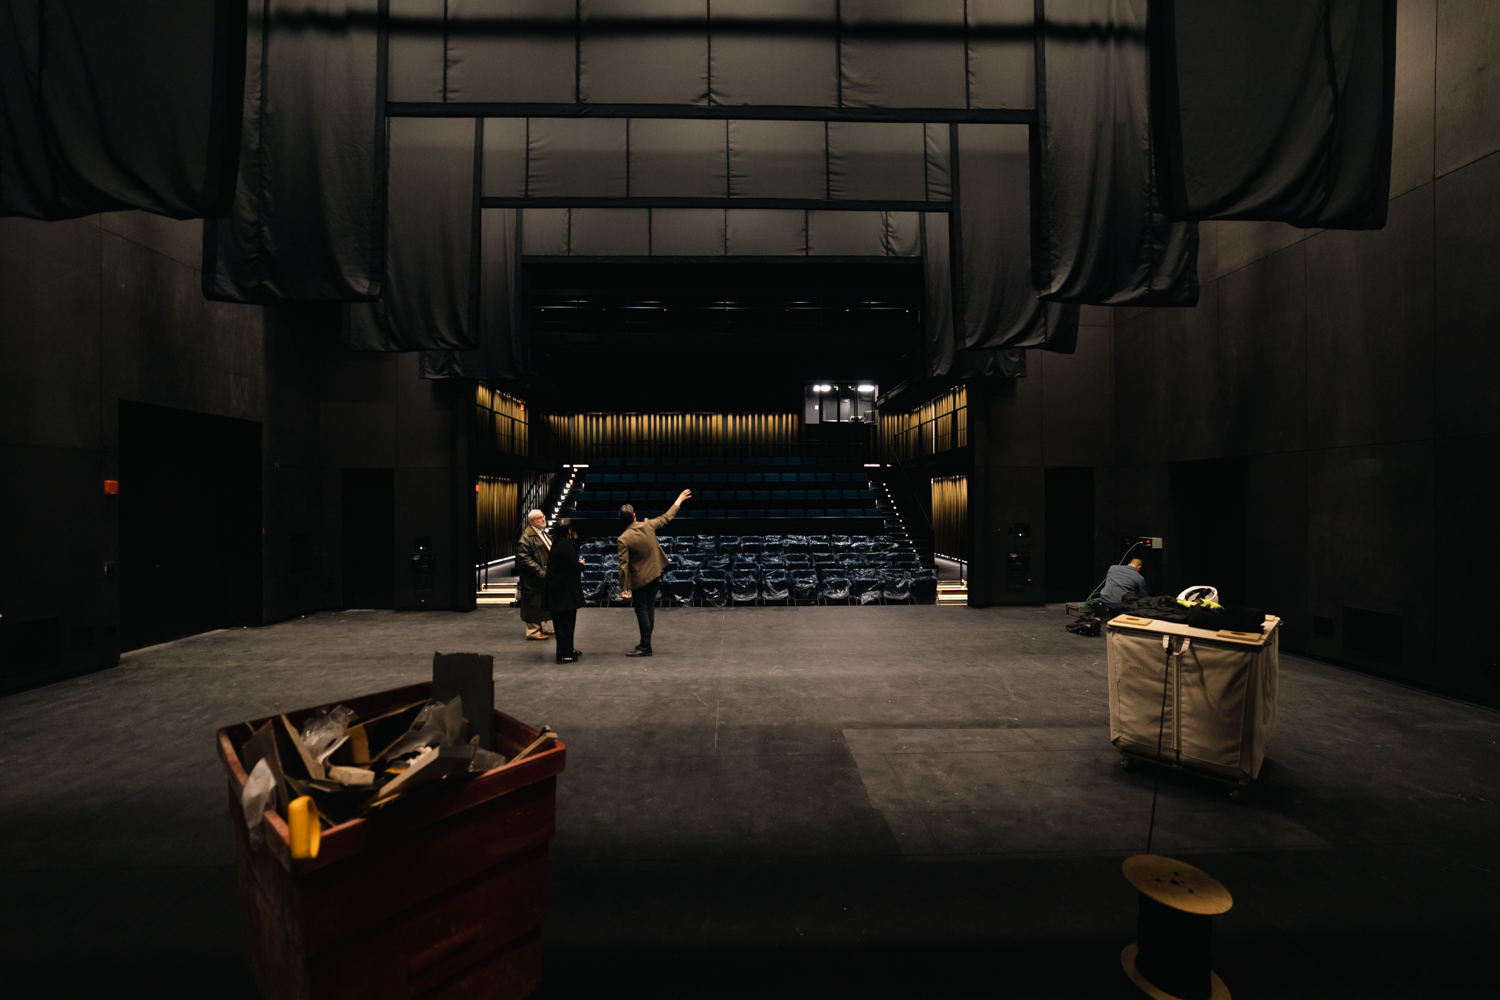 A photo from the back of the stage inside a theater to an empty audience. There are four layers of black curtains hung above the stage and three people standing on the stage. Two carts of construction materials are behind them.